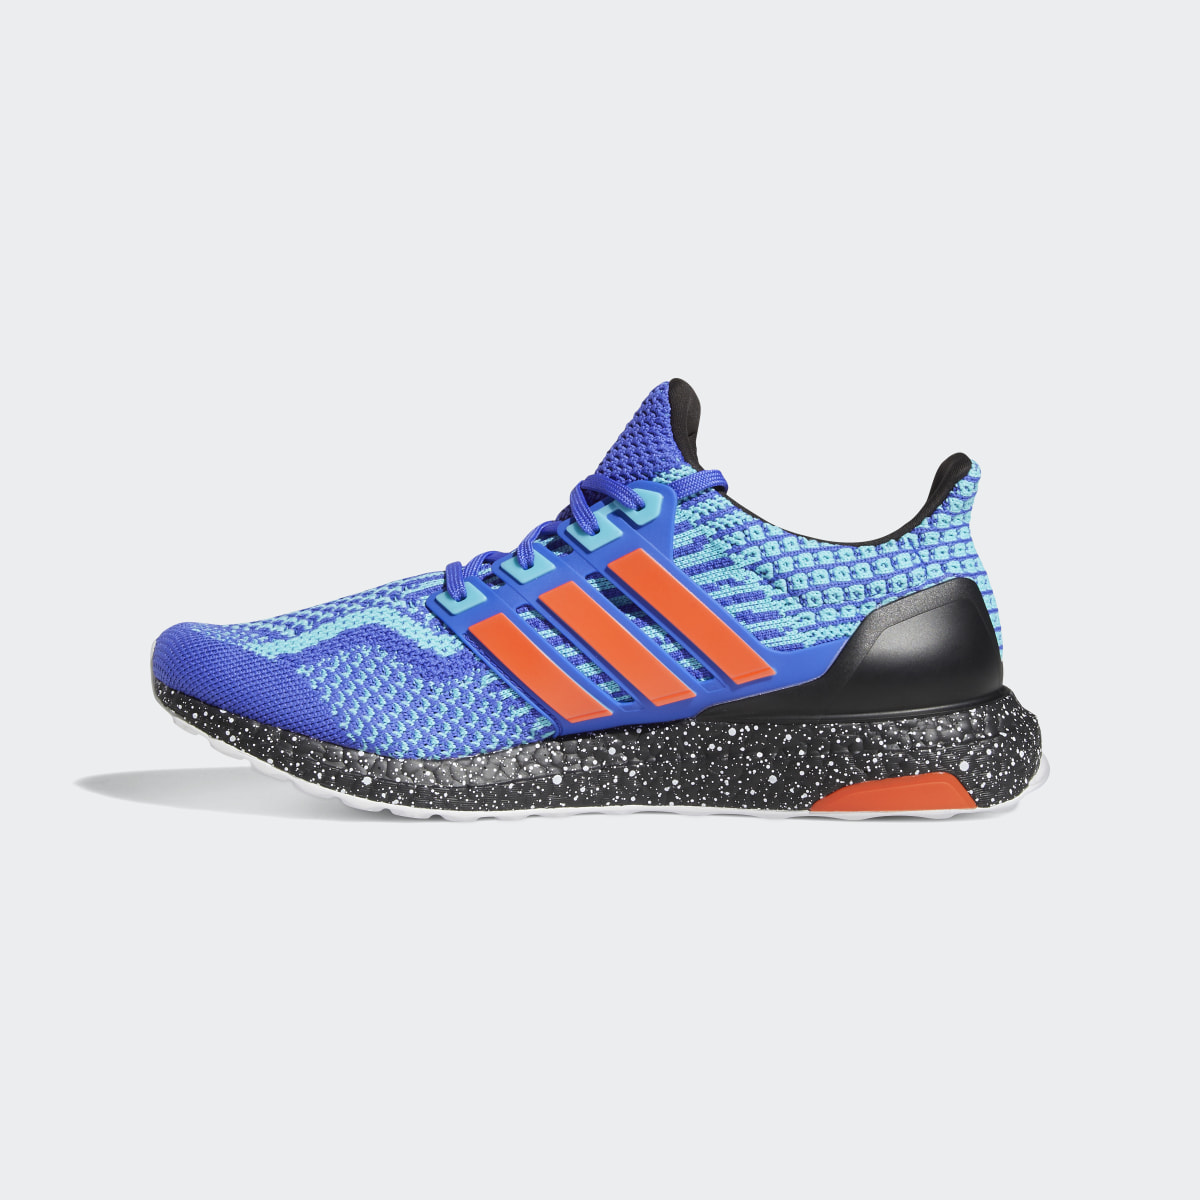 Adidas Ultraboost 5.0 DNA Shoes. 7